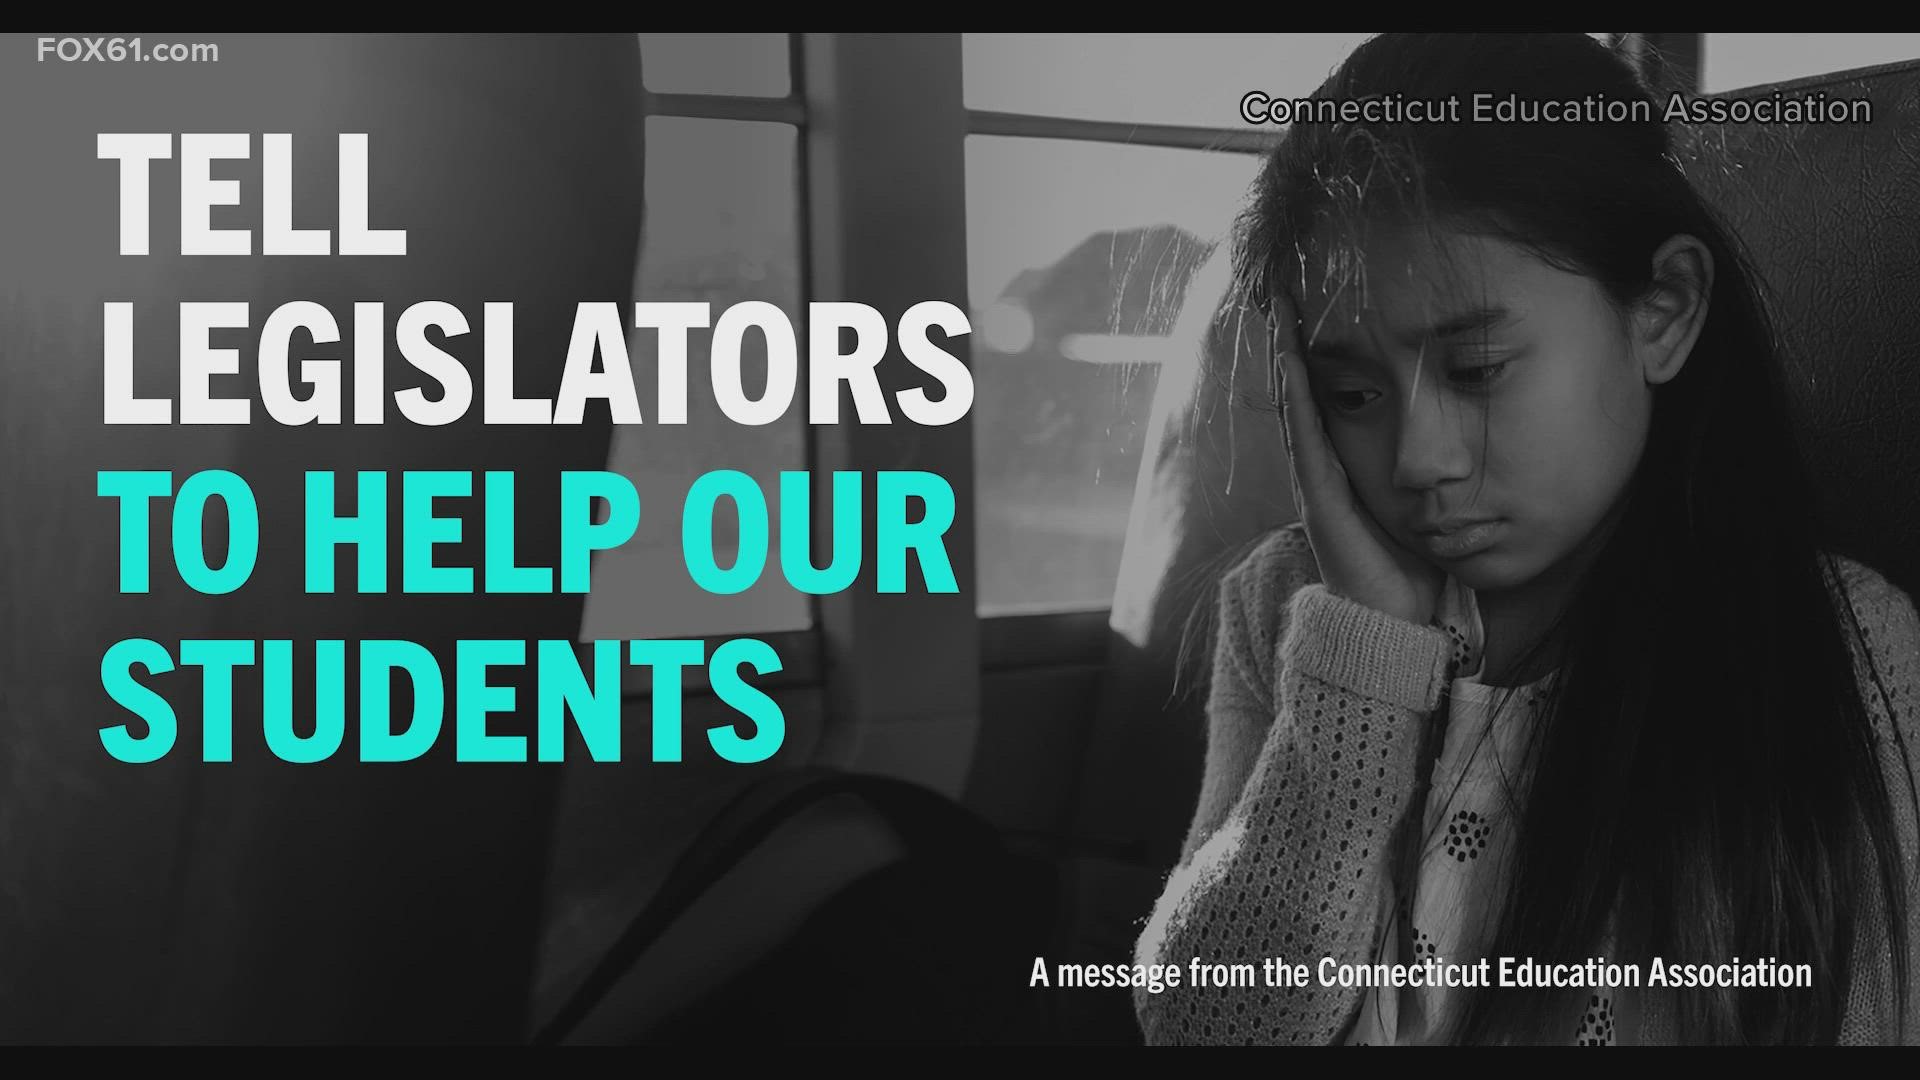 The CEA's What You Don't See campaign includes powerful video testimony from parents and those on the front lines, battling the mental health crisis in Conn. schools